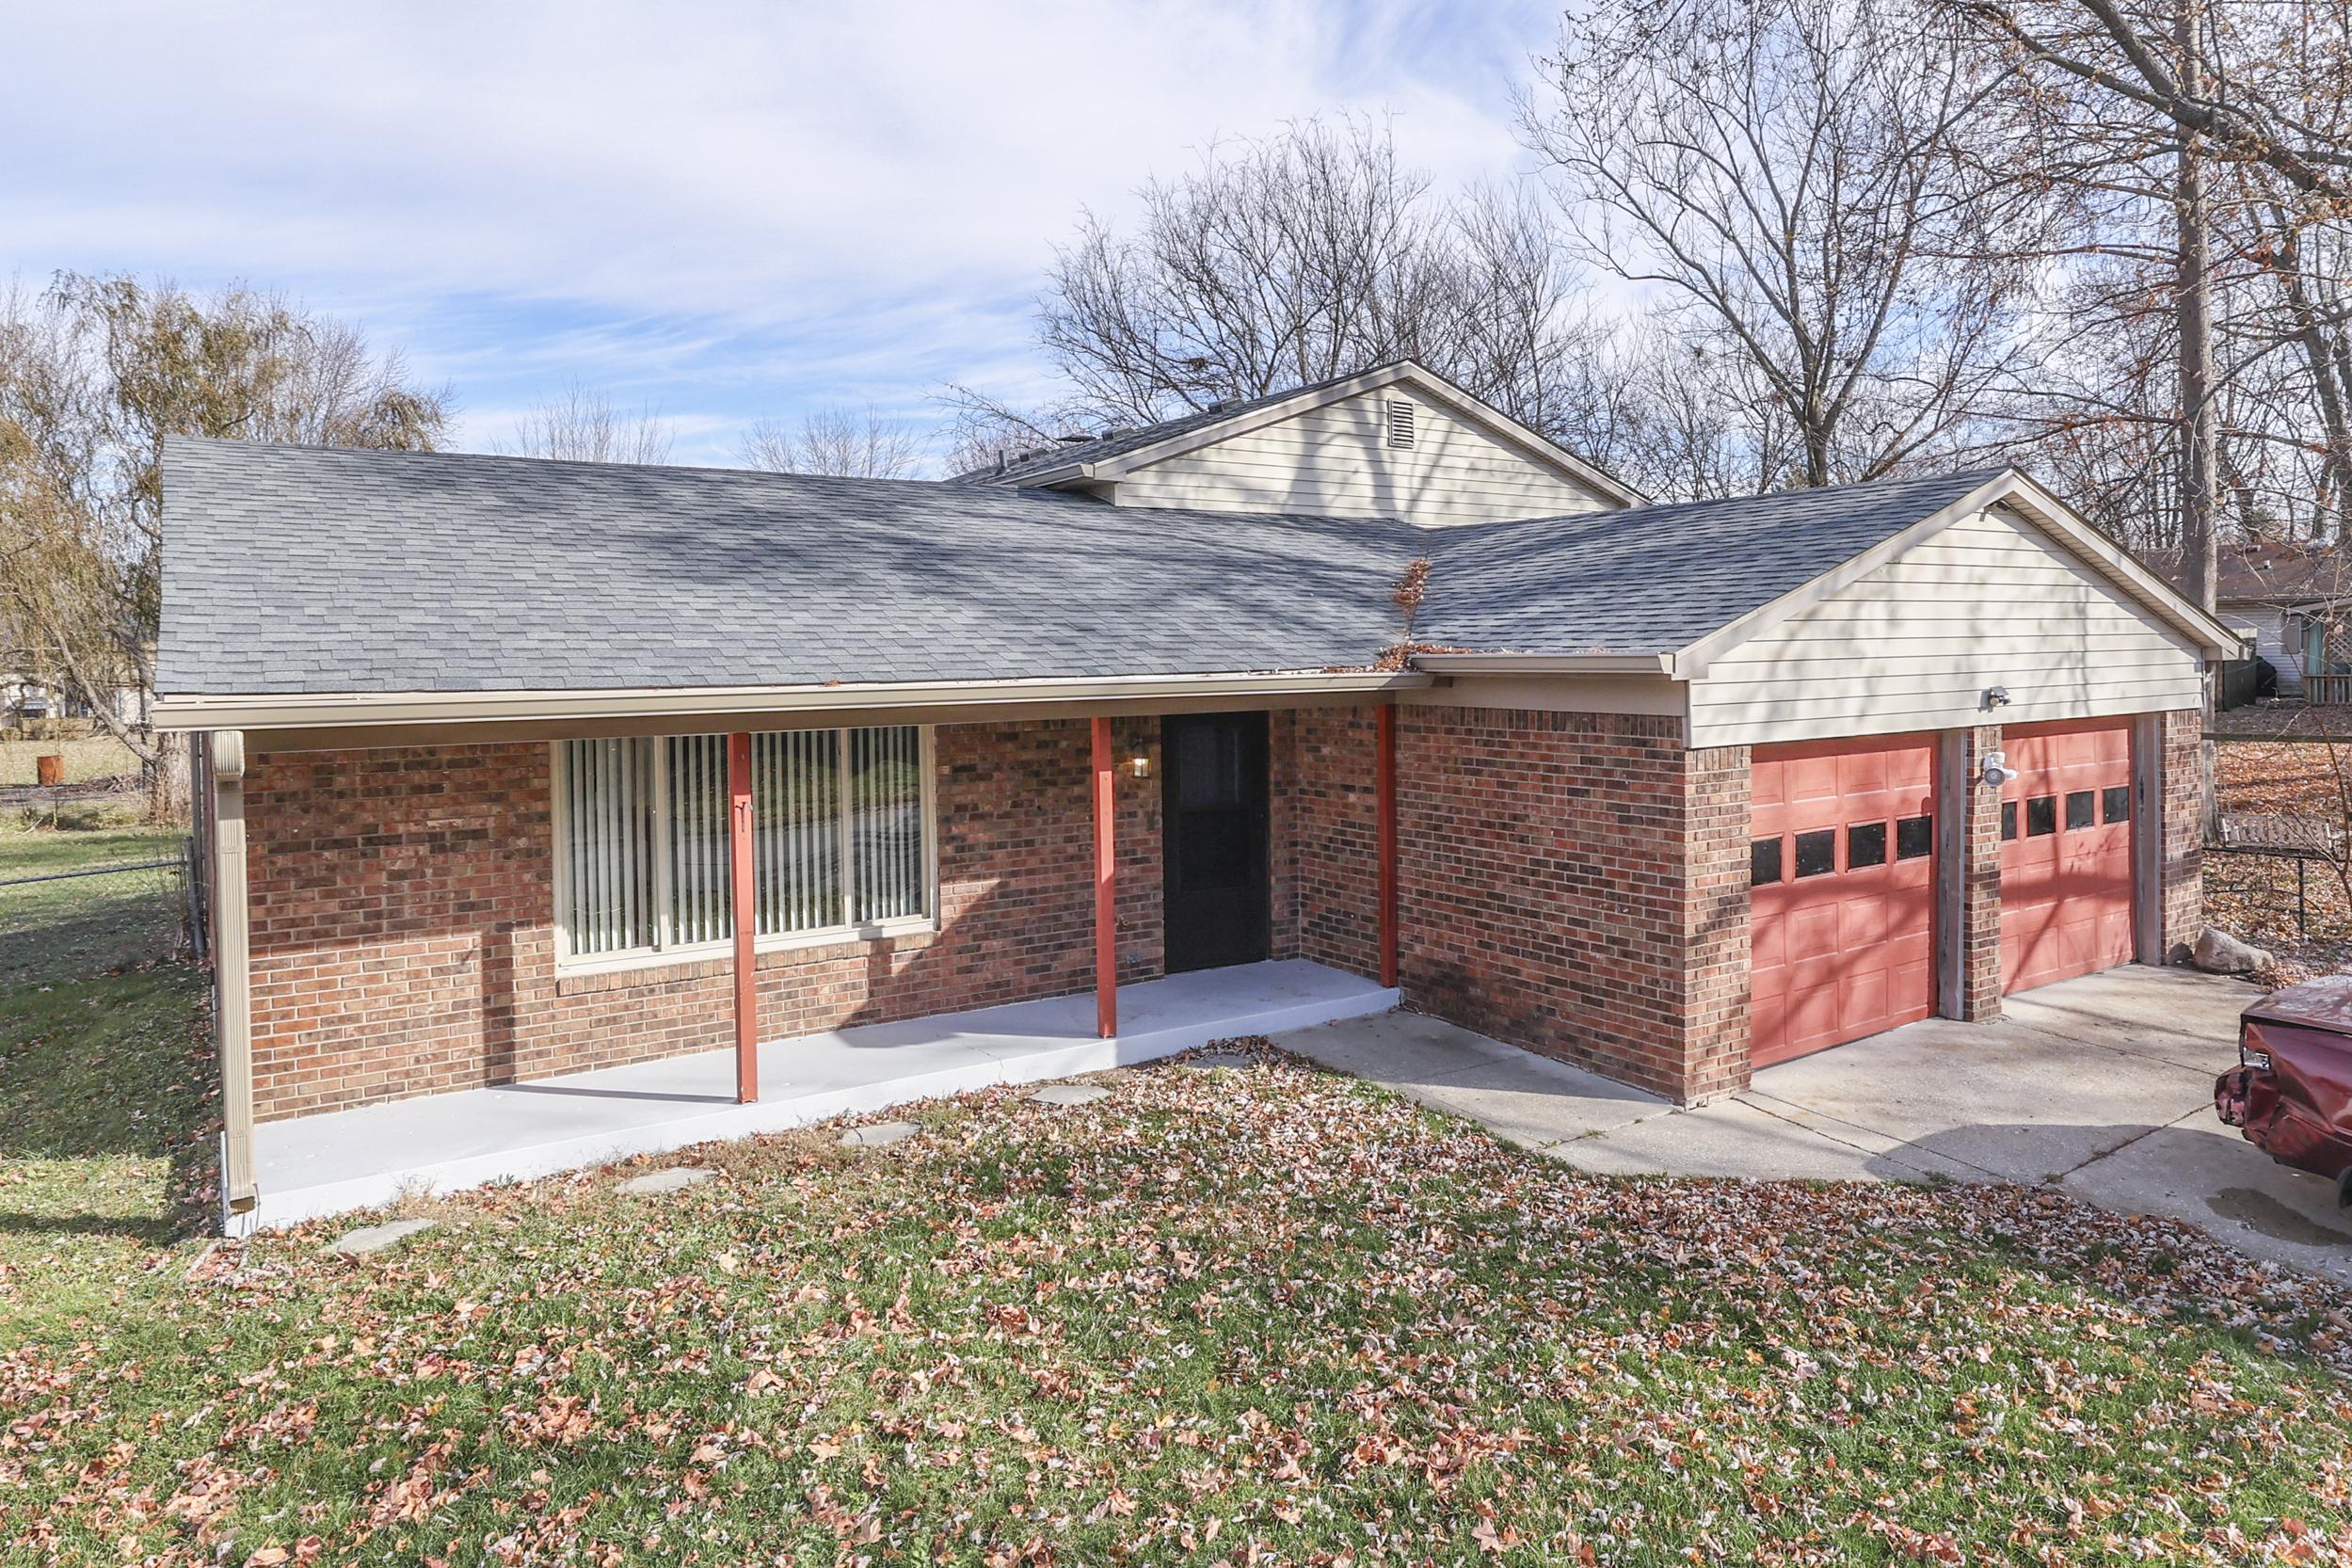 Photo one of 5626 Personality Ct Indianapolis IN 46237 | MLS 21955100